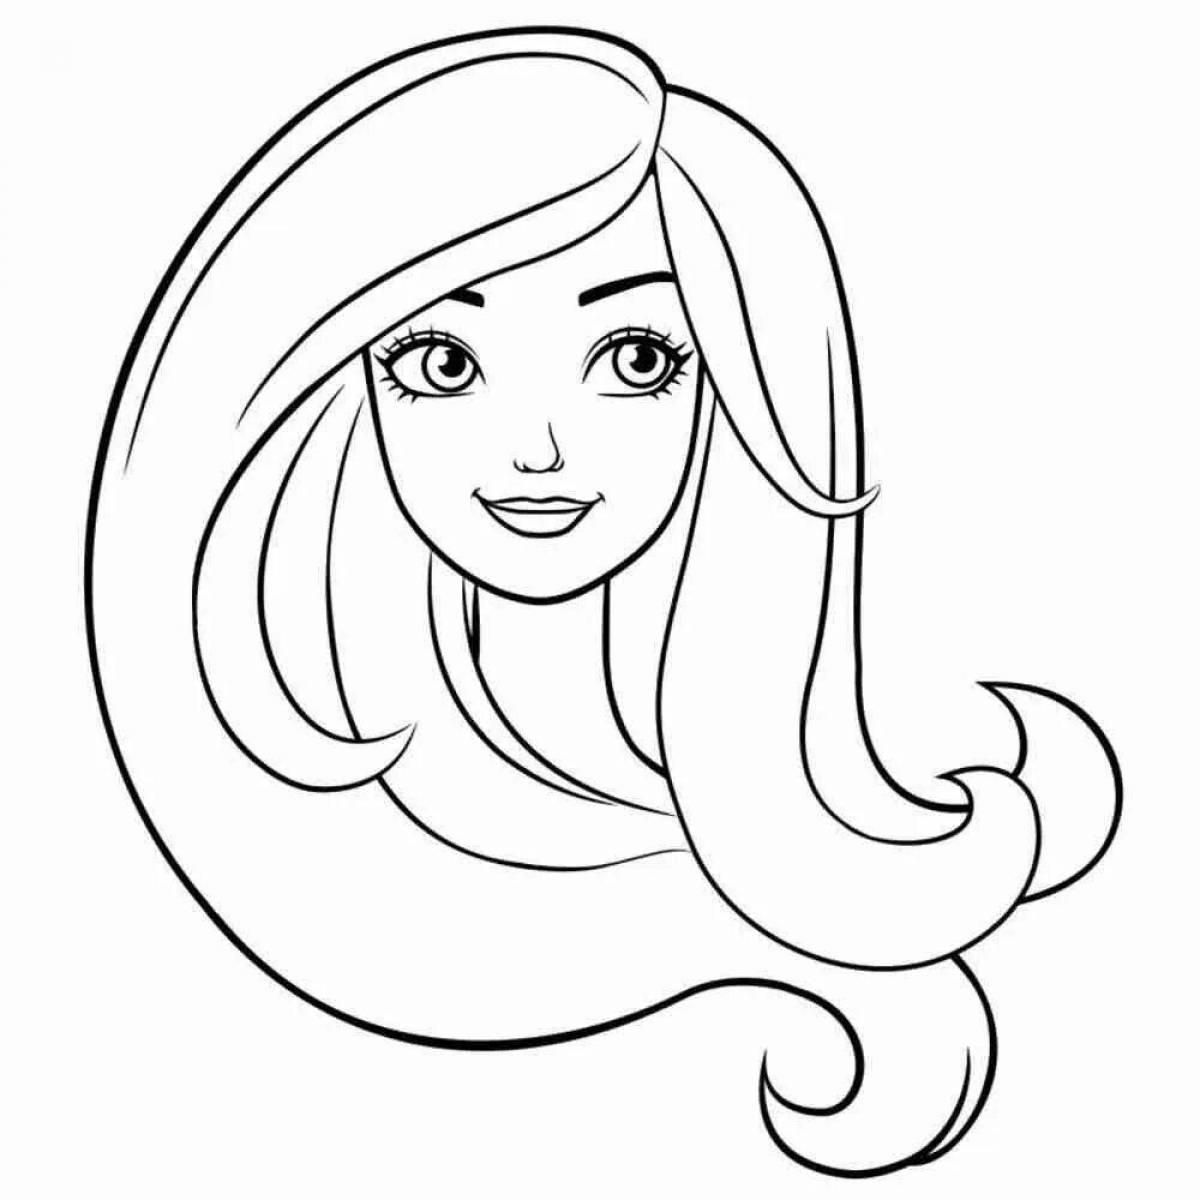 Cute easy coloring pages for girls 8 years old